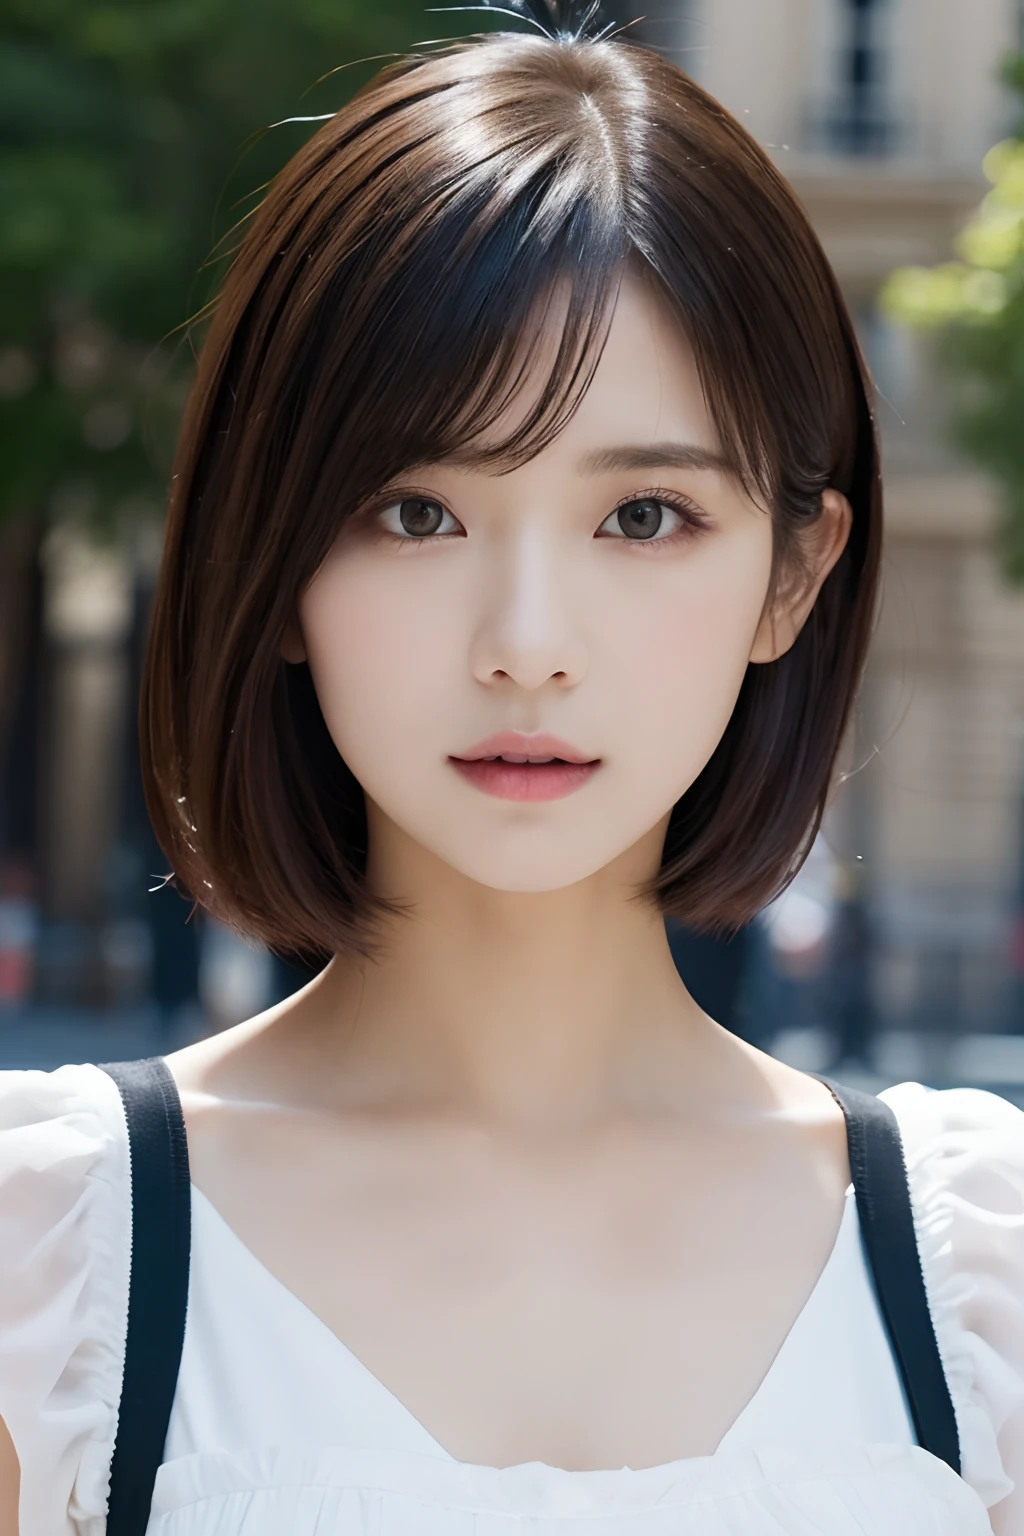 1girl in, Very elegant girl, (Young Face, Cute), (French maid costume:1.2), (Raw photo, Best Quality), (Realistic, Photorealsitic:1.4), masutepiece, Extremely delicate and beautiful, Extremely detailed, 2k wallpaper, amazing, finely detail, the Extremely Detailed CG Unity 8K Wallpapers, Ultra-detailed, hight resolution, Soft light, Beautiful detailed girl, extremely detailed eye and face, beautiful detailed nose, Beautiful detailed eyes, Short hair, 
Bangs, Elegant rounded bob, Cinematic lighting, Typical views of Paris, Perfect Anatomy, Slender body, Beautiful constricted waist, thin legs, Looking at the camera